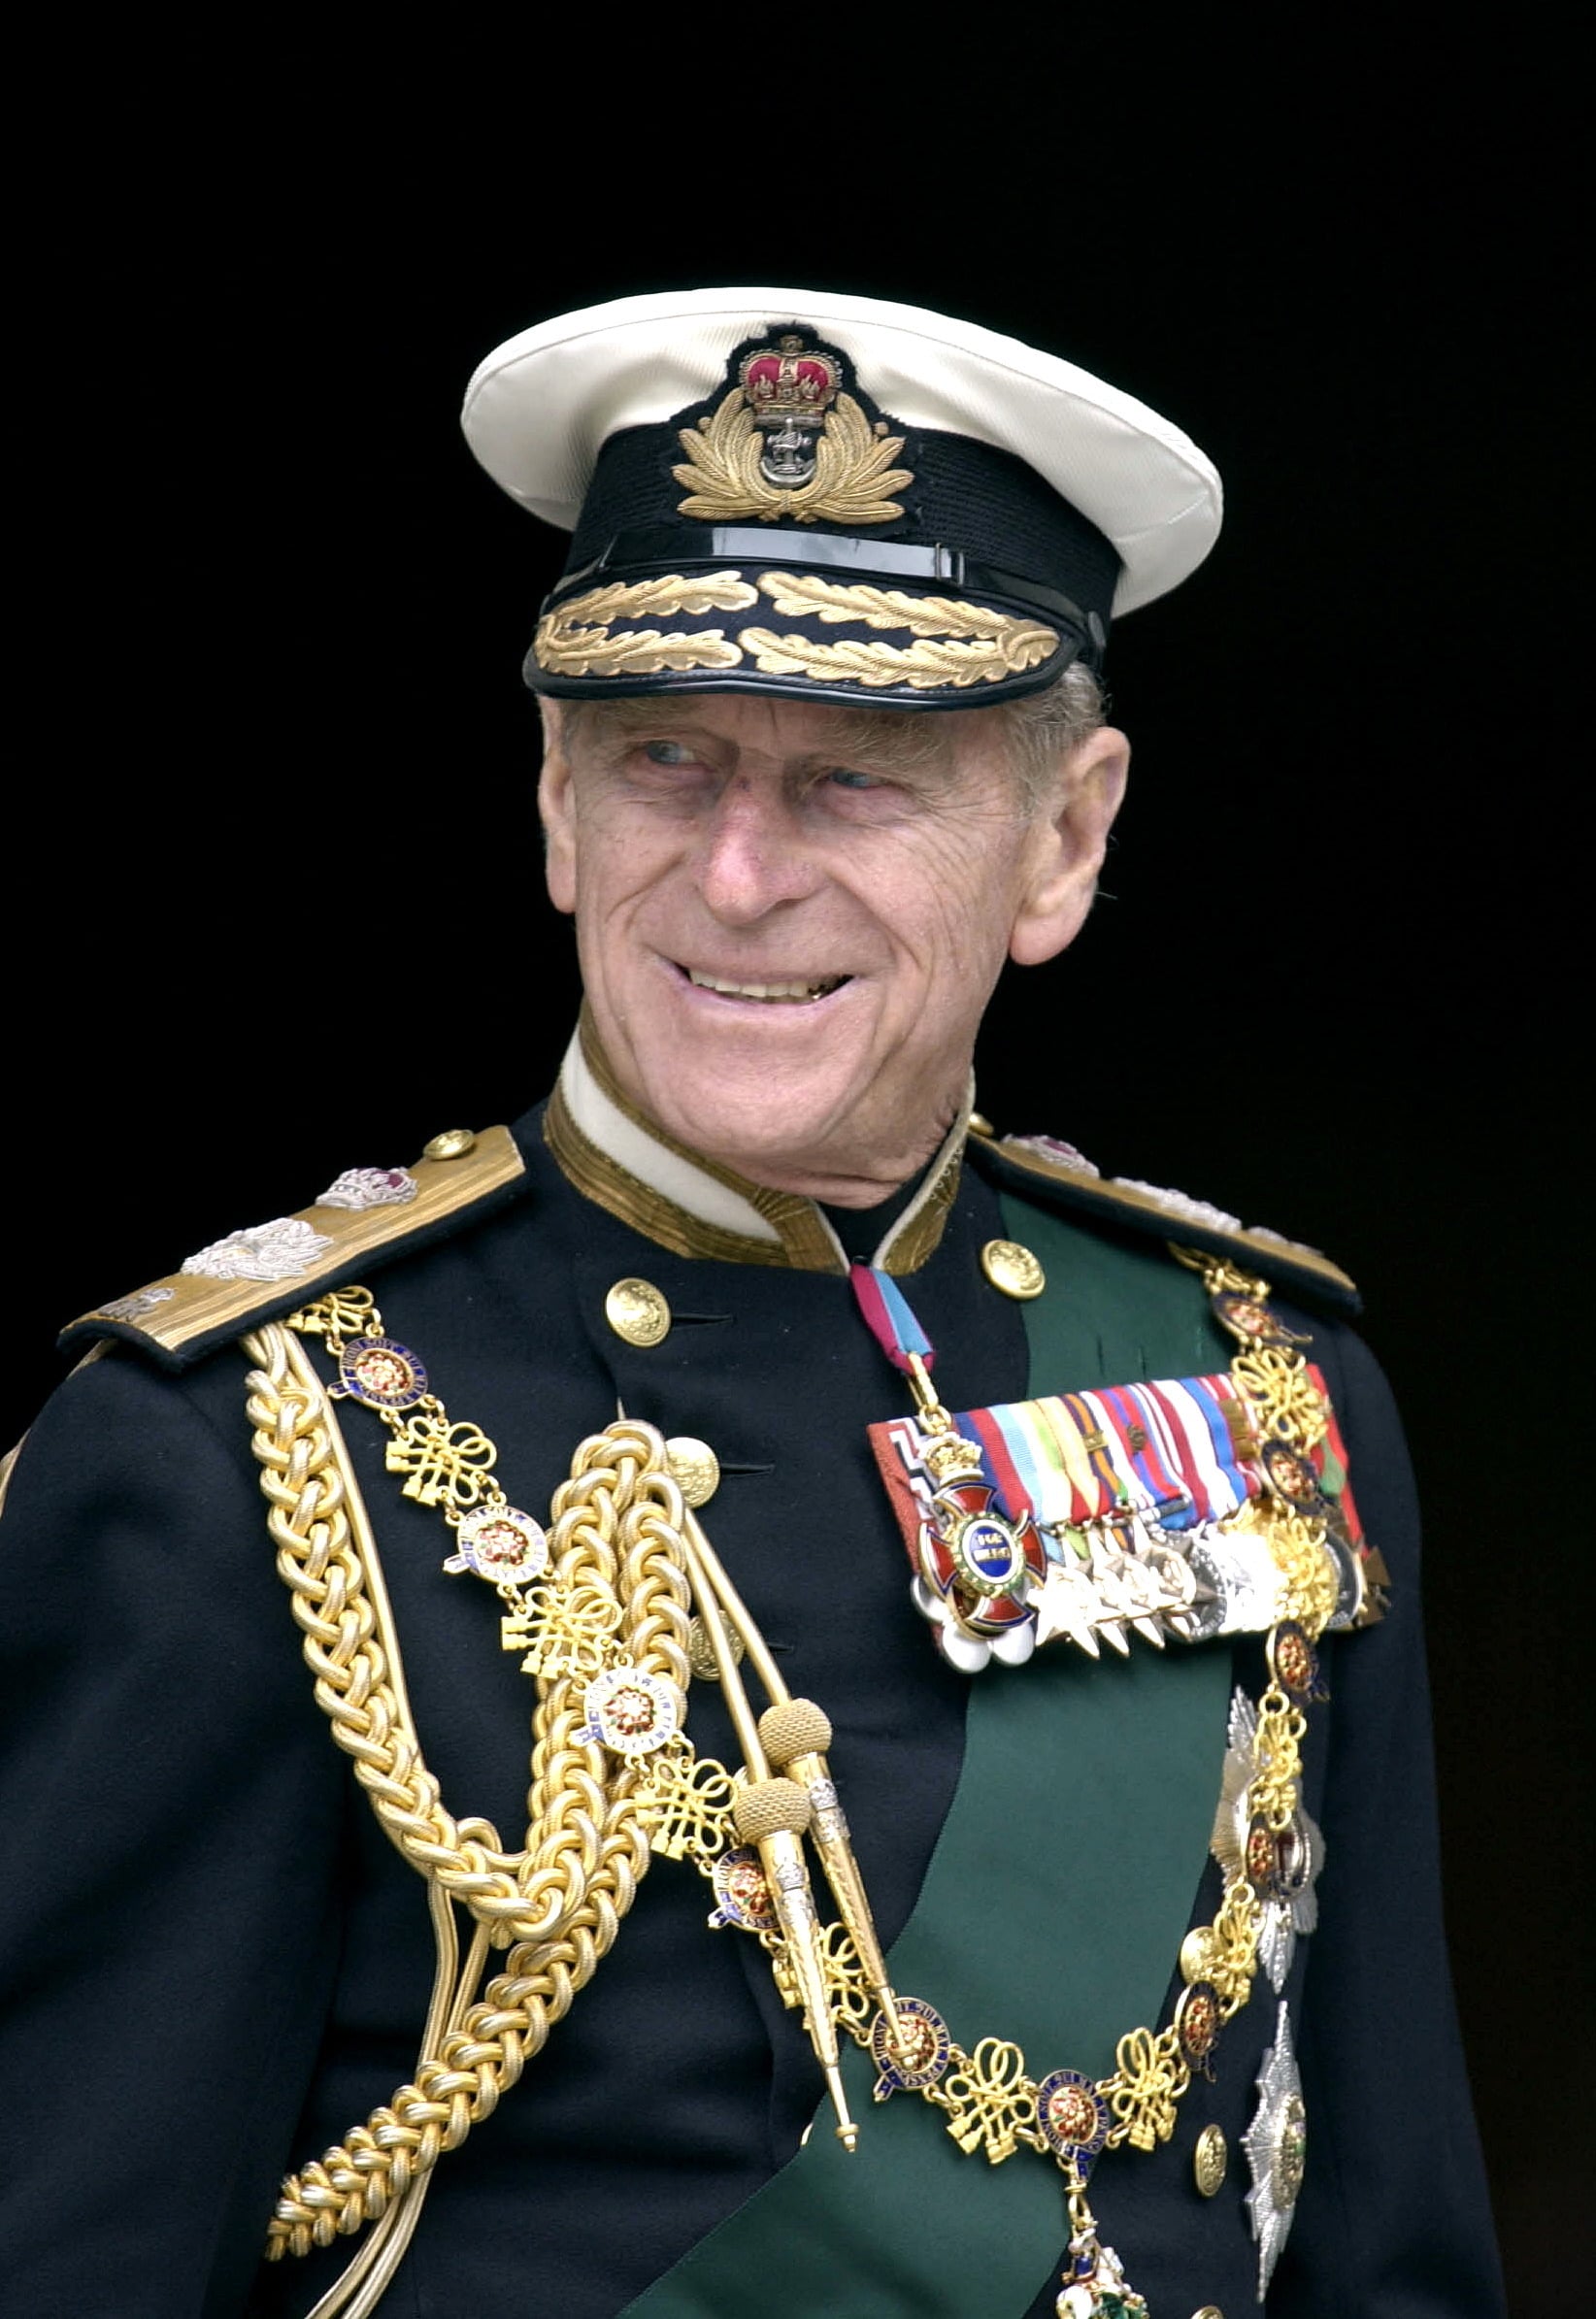 the rose code prince philip